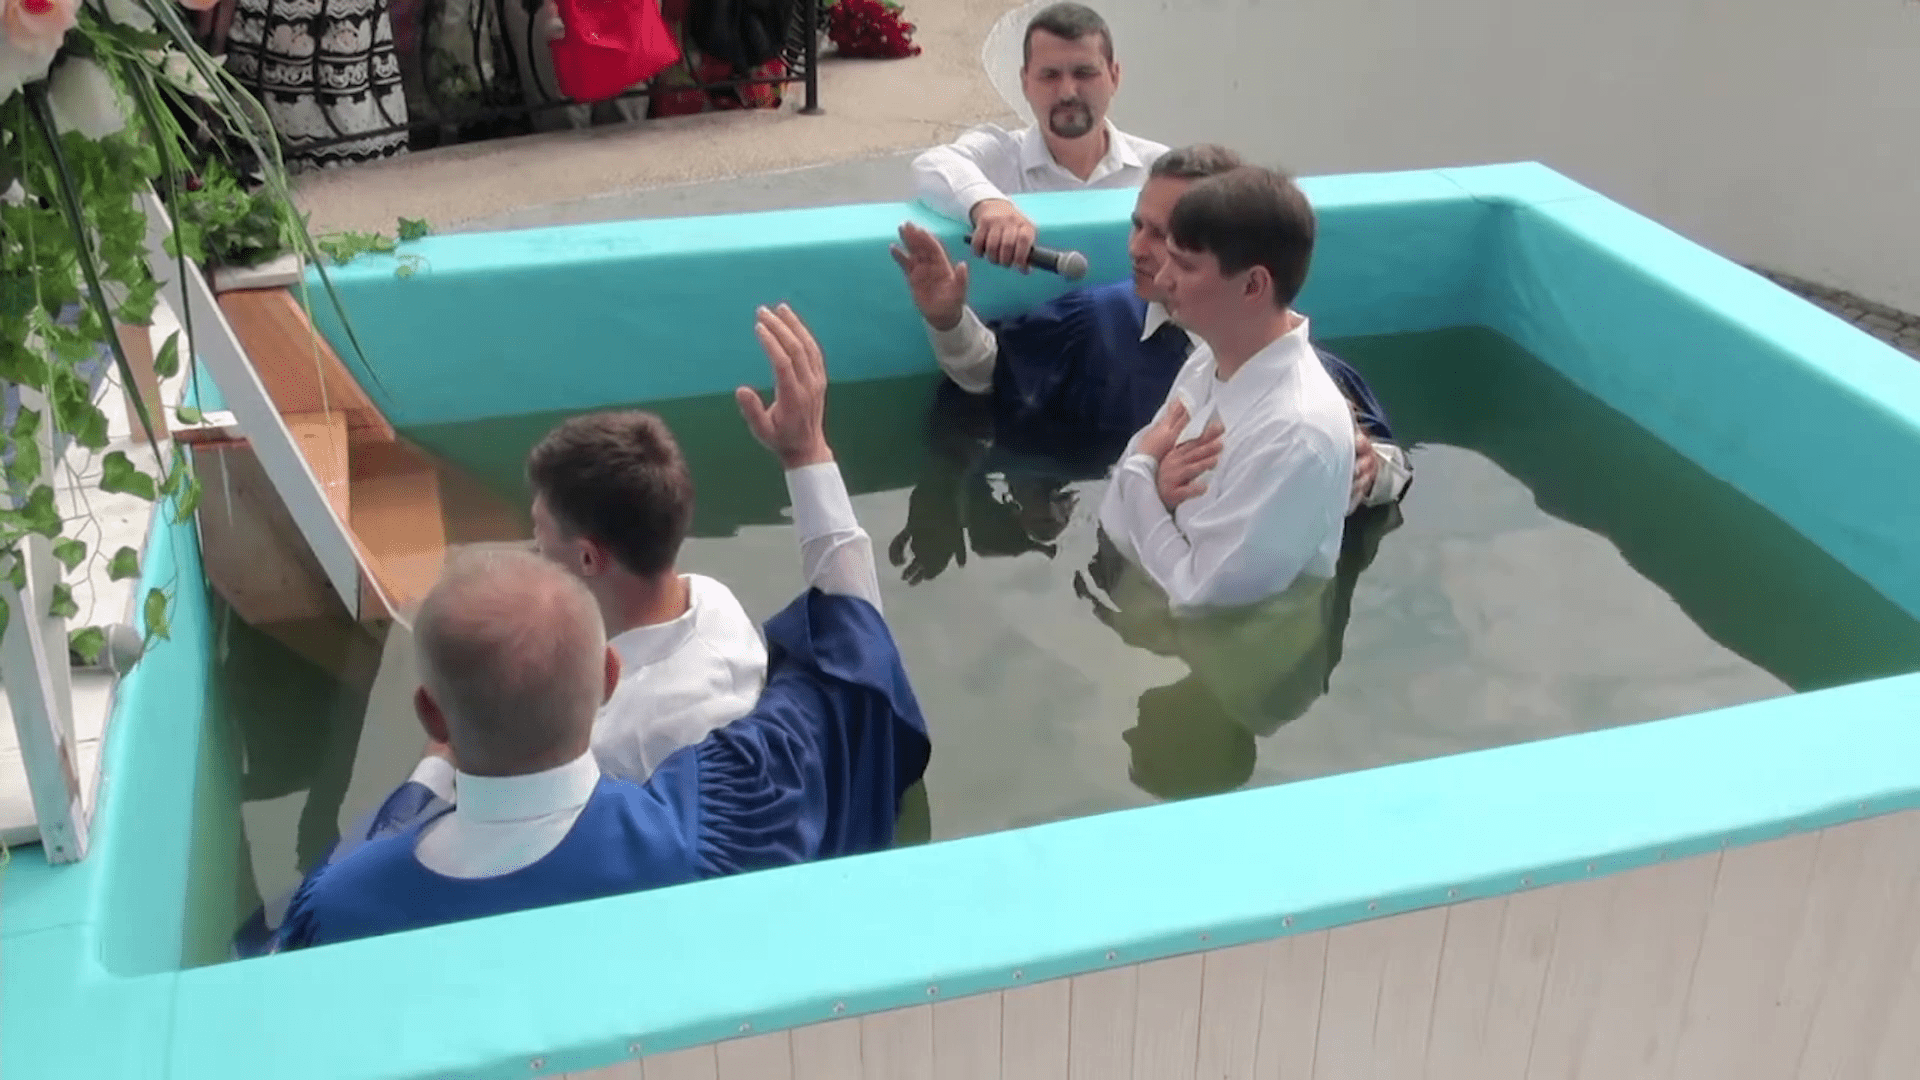 Ukraine Churches have been emptied because Ukrainians are fleeing. But the church is growing and there were 4,000 baptisms in 2022.